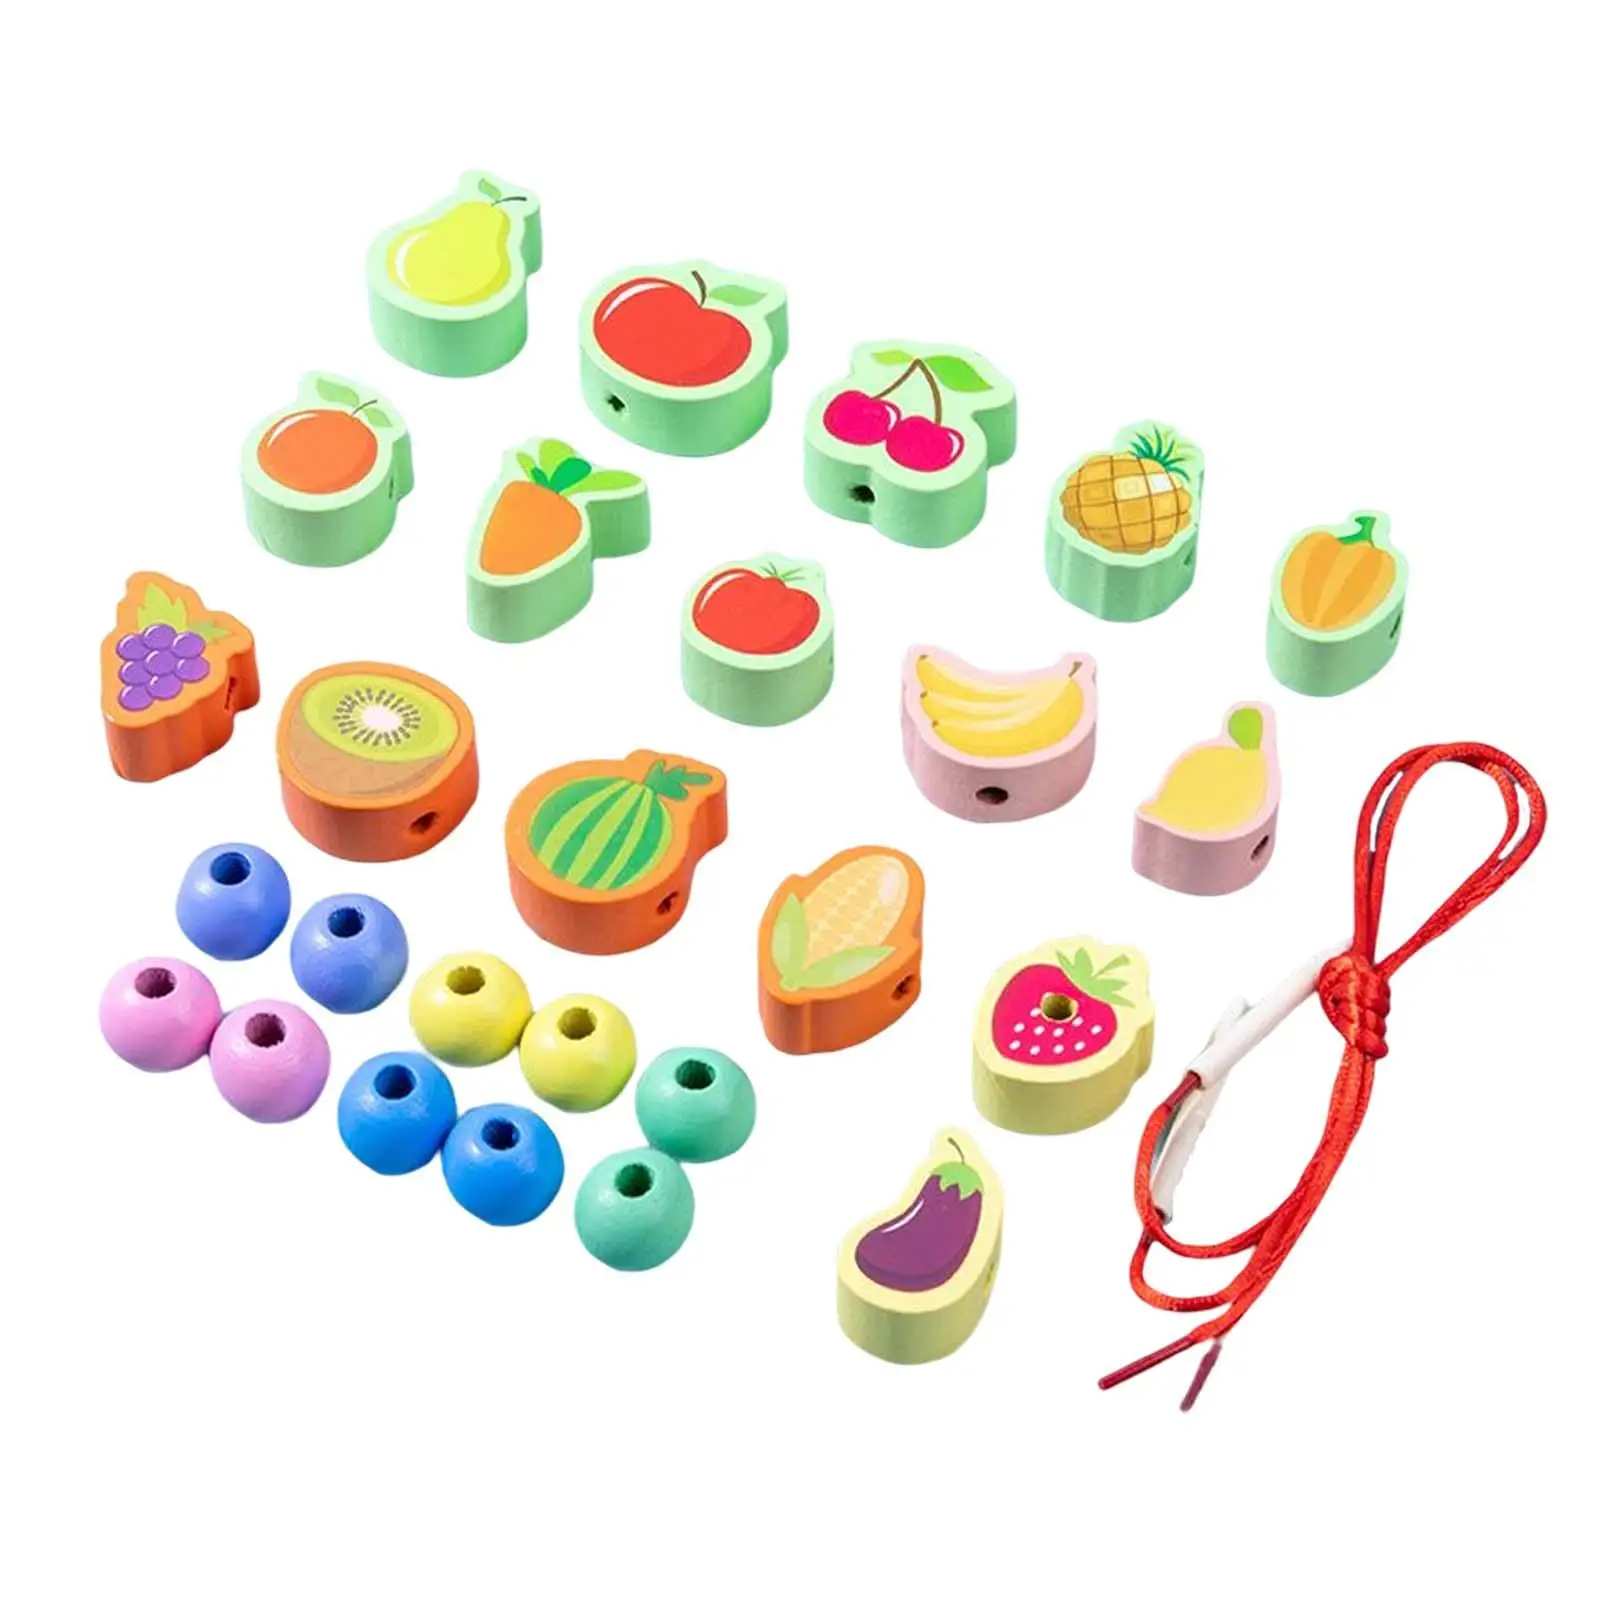 Wooden Threading Toys Developmental Toy Lacing Beads Set for Birthday Gifts